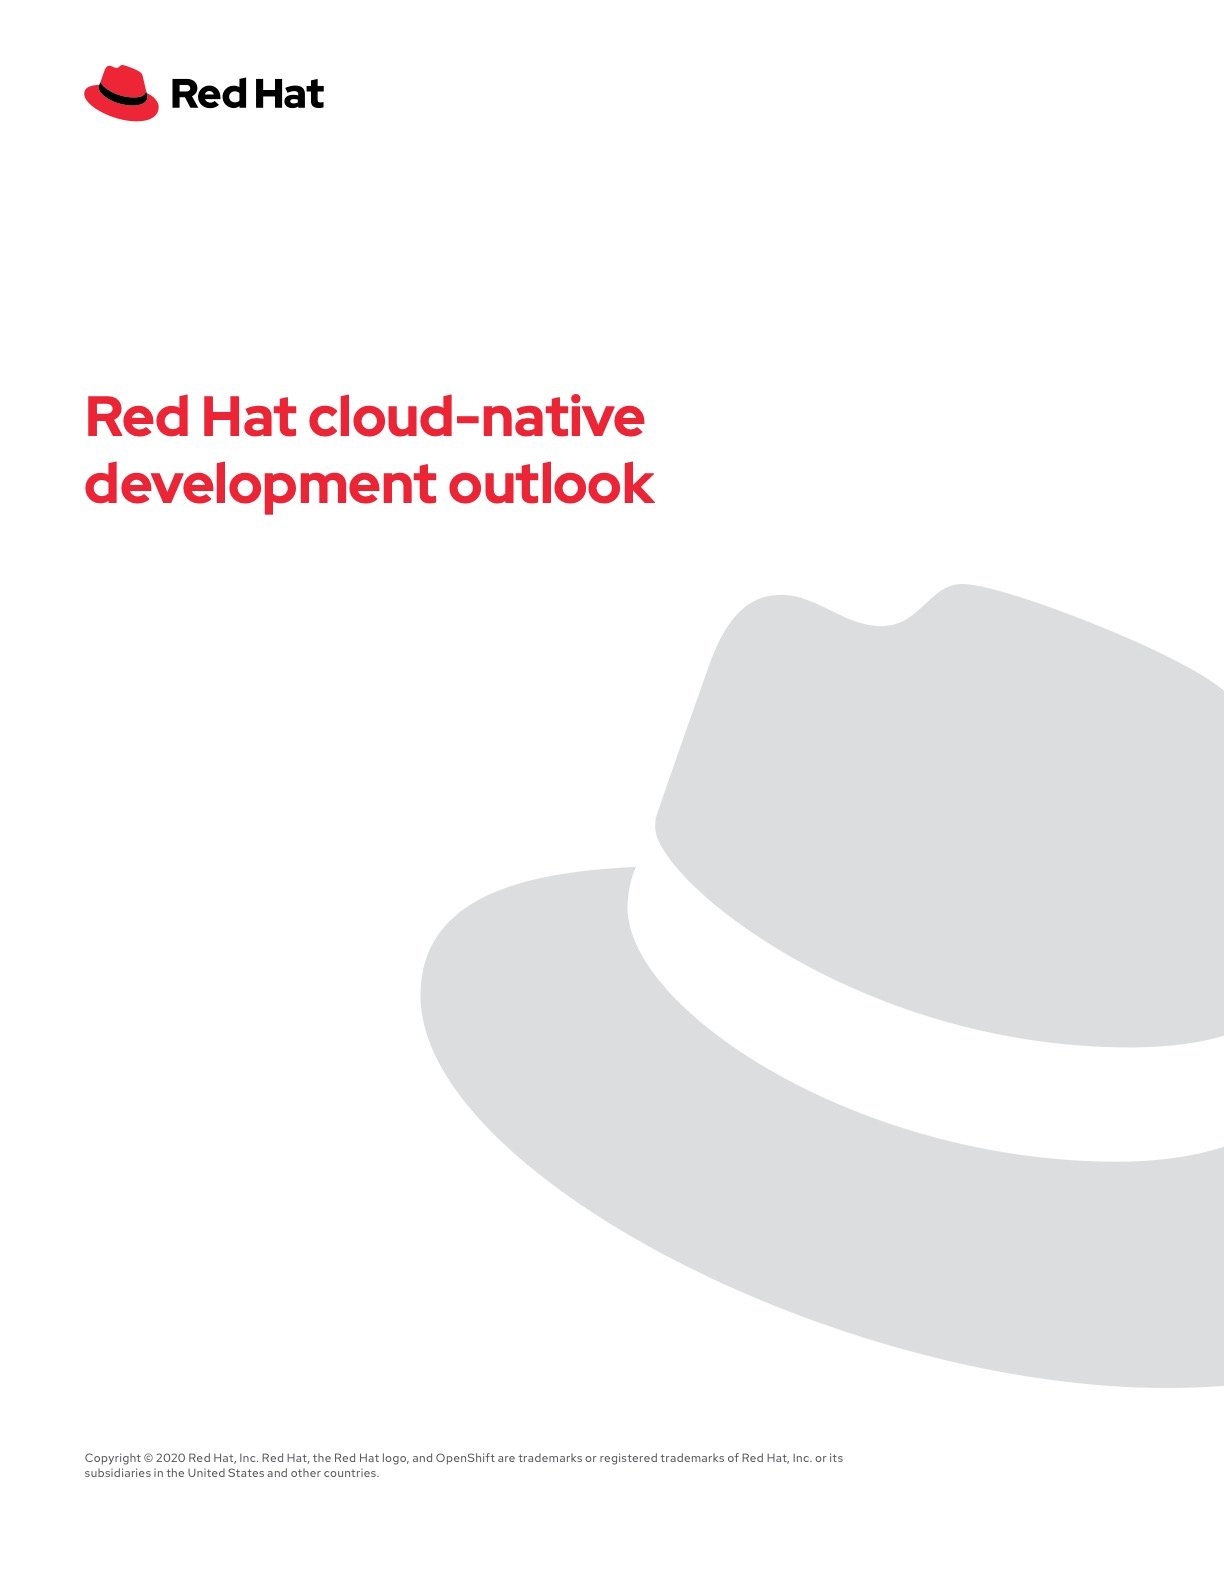 cover_Red Hat cloud-native development outlook